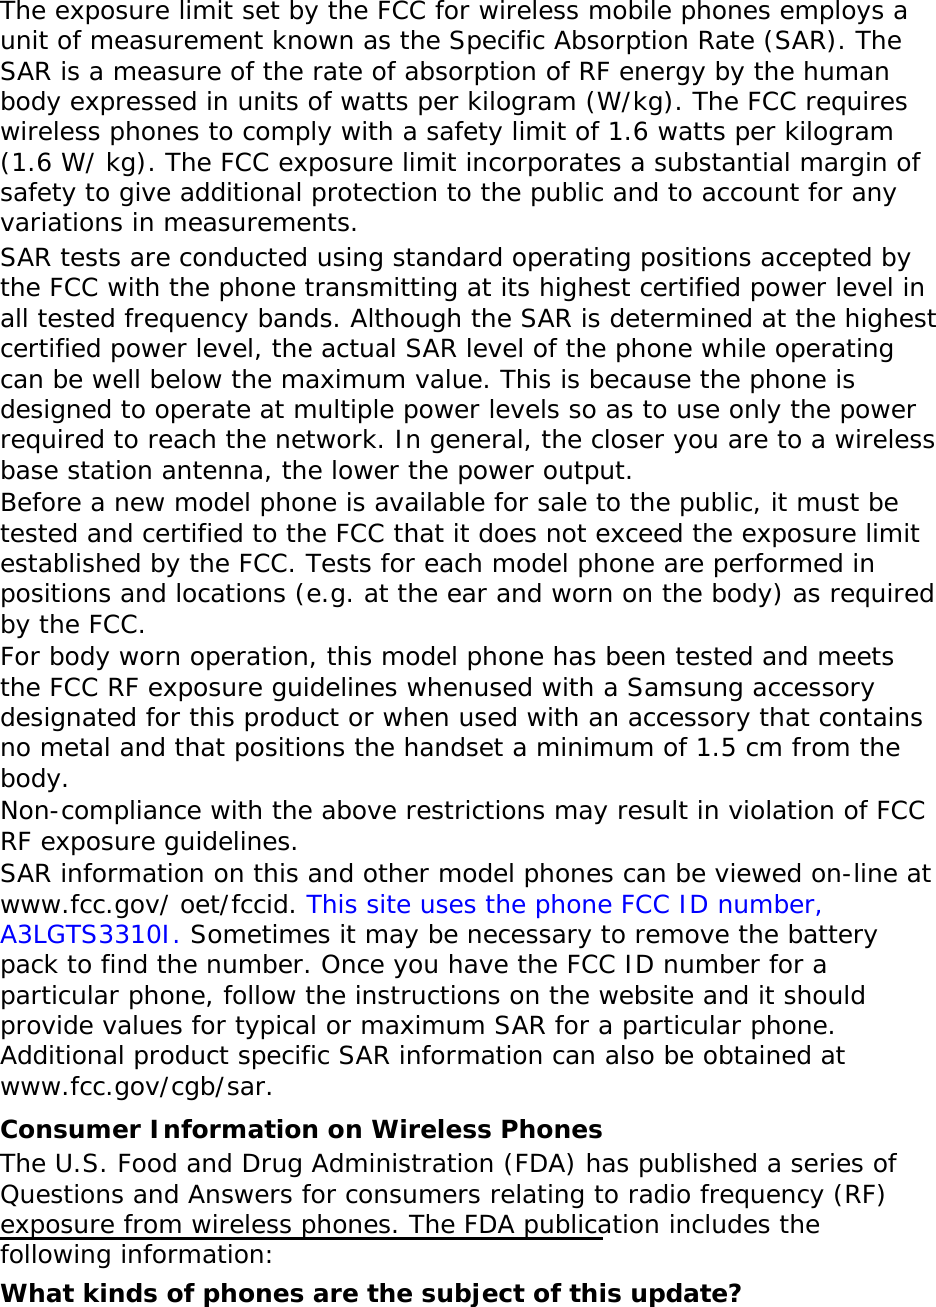   The exposure limit set by the FCC for wireless mobile phones employs a unit of measurement known as the Specific Absorption Rate (SAR). The SAR is a measure of the rate of absorption of RF energy by the human body expressed in units of watts per kilogram (W/kg). The FCC requires wireless phones to comply with a safety limit of 1.6 watts per kilogram (1.6 W/ kg). The FCC exposure limit incorporates a substantial margin of safety to give additional protection to the public and to account for any variations in measurements. SAR tests are conducted using standard operating positions accepted by the FCC with the phone transmitting at its highest certified power level in all tested frequency bands. Although the SAR is determined at the highest certified power level, the actual SAR level of the phone while operating can be well below the maximum value. This is because the phone is designed to operate at multiple power levels so as to use only the power required to reach the network. In general, the closer you are to a wireless base station antenna, the lower the power output. Before a new model phone is available for sale to the public, it must be tested and certified to the FCC that it does not exceed the exposure limit established by the FCC. Tests for each model phone are performed in positions and locations (e.g. at the ear and worn on the body) as required by the FCC.   For body worn operation, this model phone has been tested and meets the FCC RF exposure guidelines whenused with a Samsung accessory designated for this product or when used with an accessory that contains no metal and that positions the handset a minimum of 1.5 cm from the body.  Non-compliance with the above restrictions may result in violation of FCC RF exposure guidelines. SAR information on this and other model phones can be viewed on-line at www.fcc.gov/ oet/fccid. This site uses the phone FCC ID number, A3LGTS3310I. Sometimes it may be necessary to remove the battery pack to find the number. Once you have the FCC ID number for a particular phone, follow the instructions on the website and it should provide values for typical or maximum SAR for a particular phone. Additional product specific SAR information can also be obtained at www.fcc.gov/cgb/sar. Consumer Information on Wireless Phones The U.S. Food and Drug Administration (FDA) has published a series of Questions and Answers for consumers relating to radio frequency (RF) exposure from wireless phones. The FDA publication includes the following information: What kinds of phones are the subject of this update? 